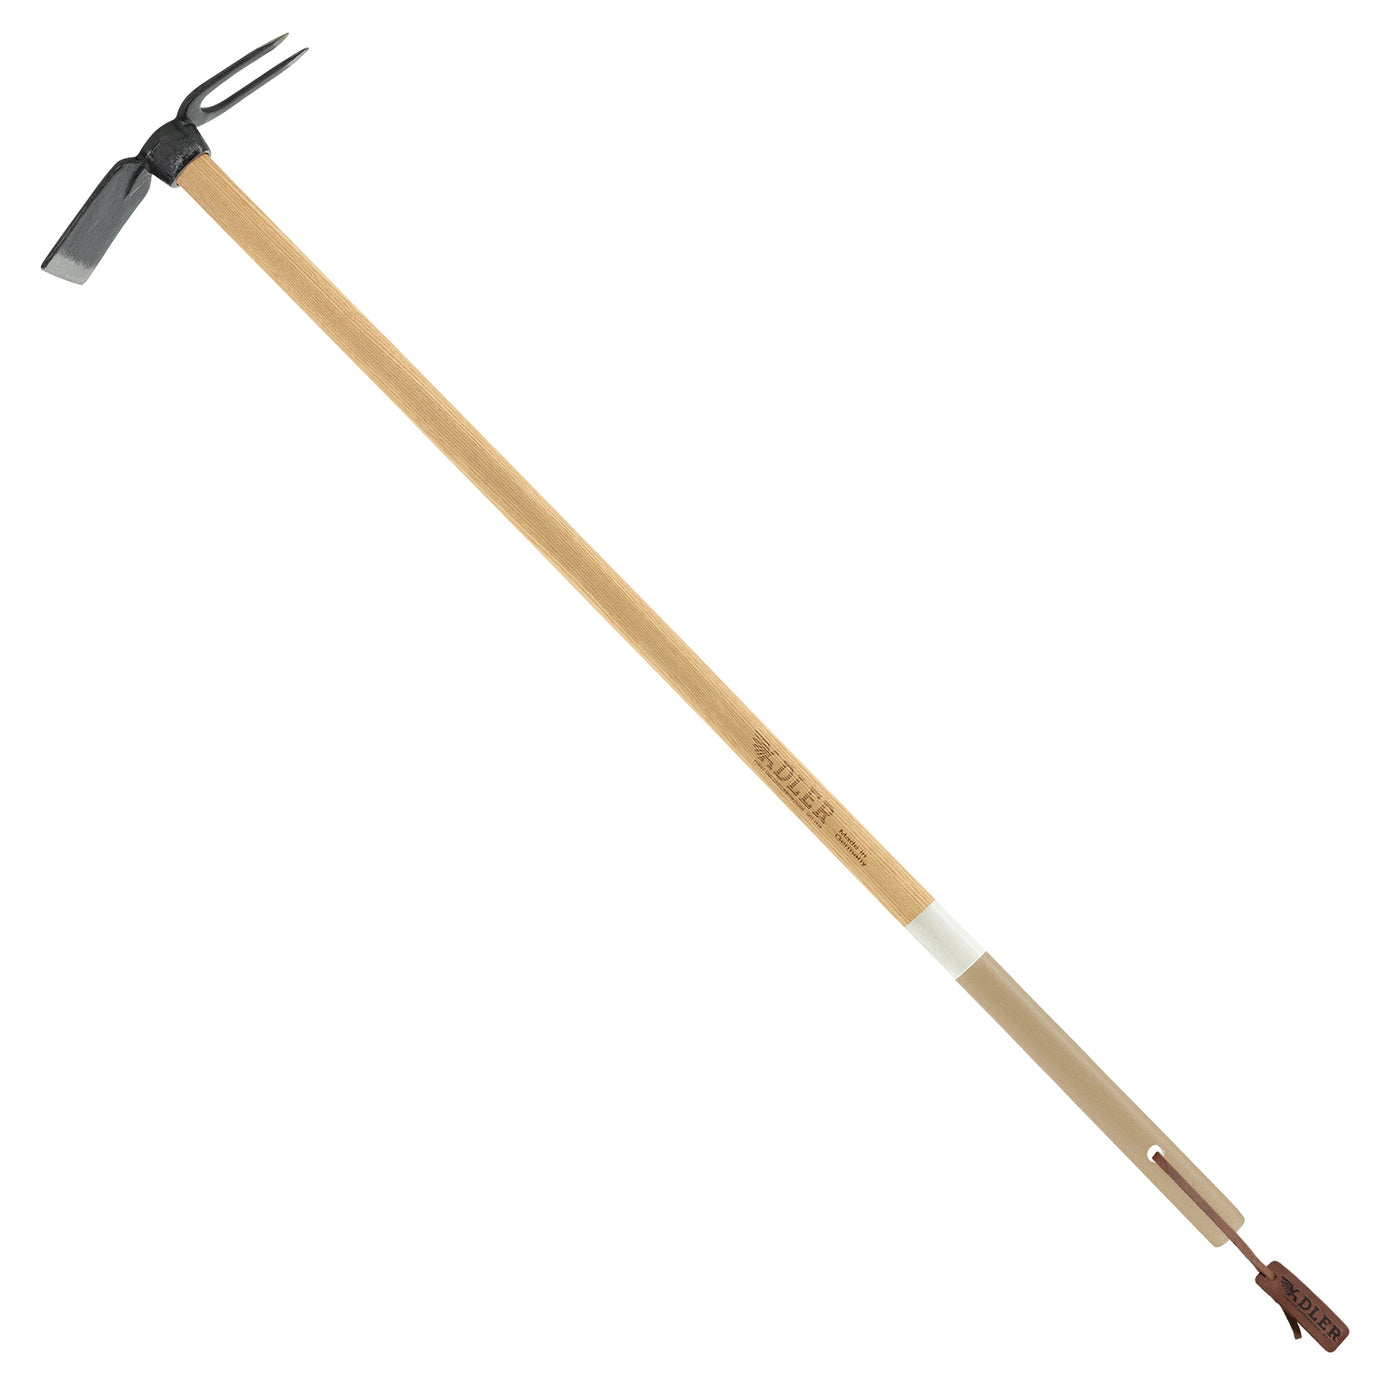 Garden Hoe “Lily” with 2 prongs